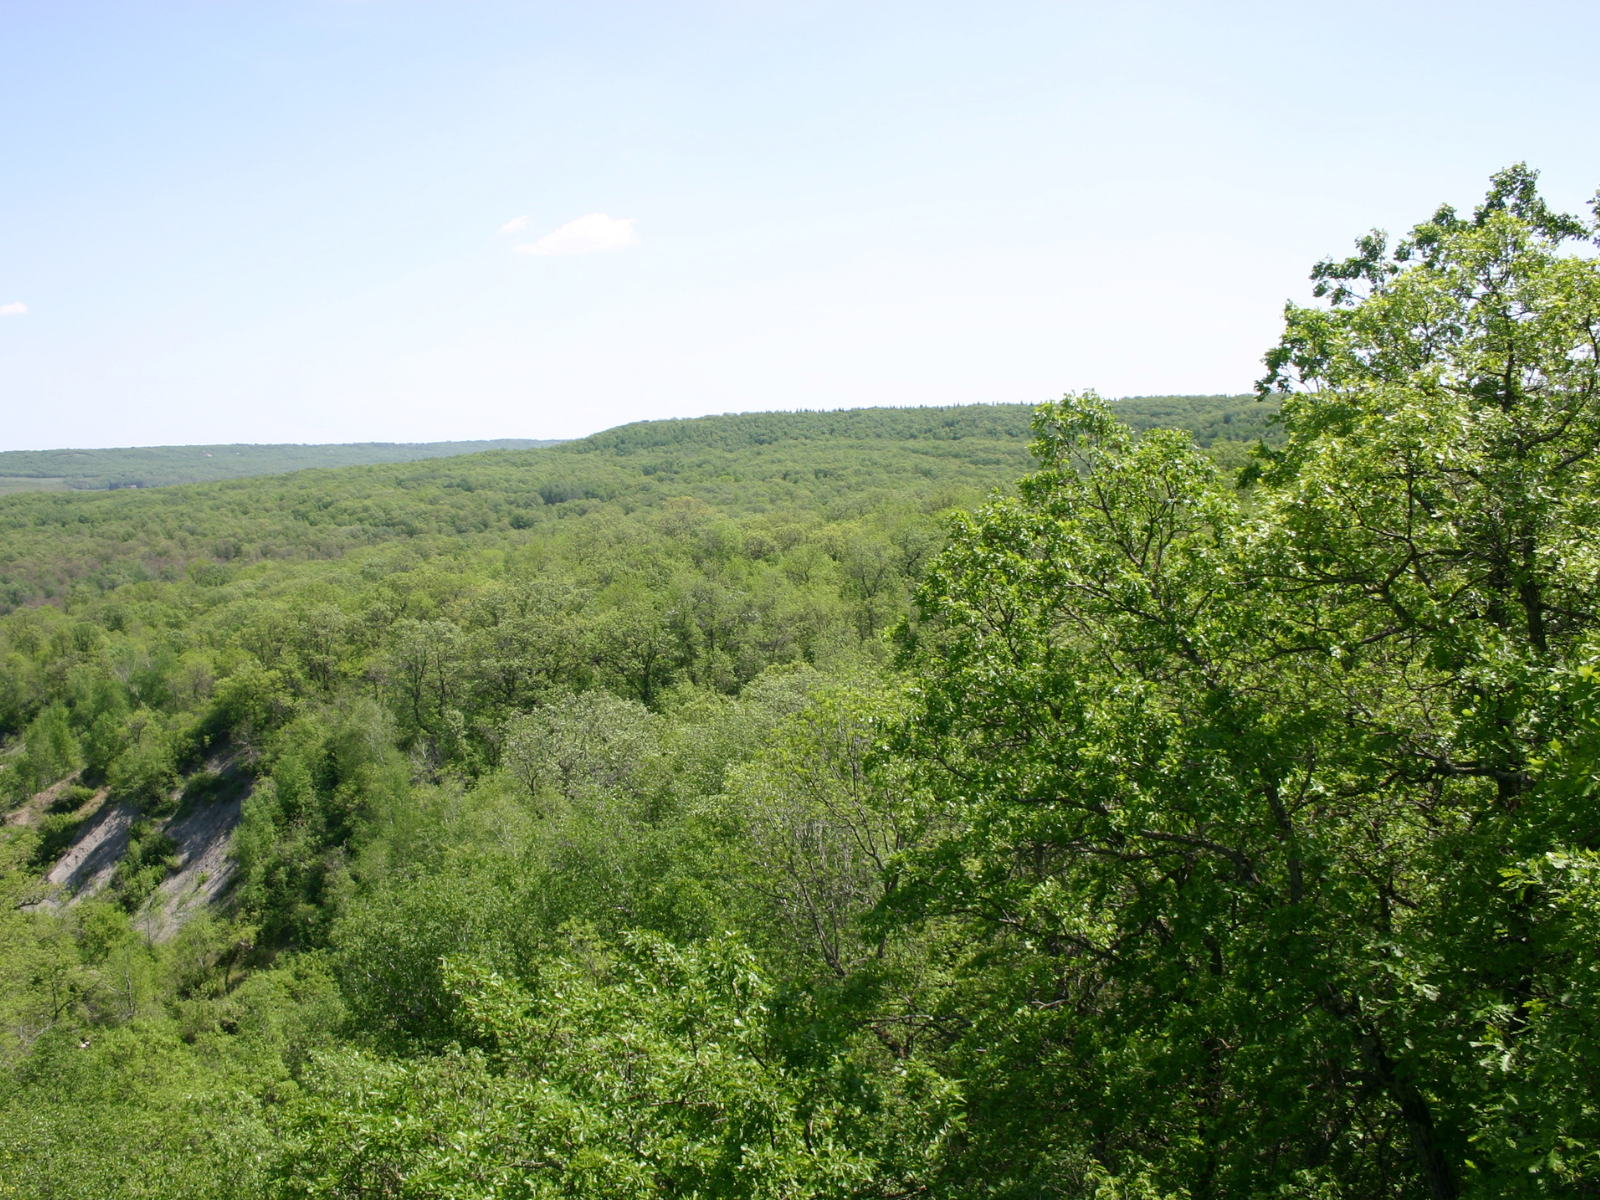 View looking out over a valley filled with green-leaved trees.